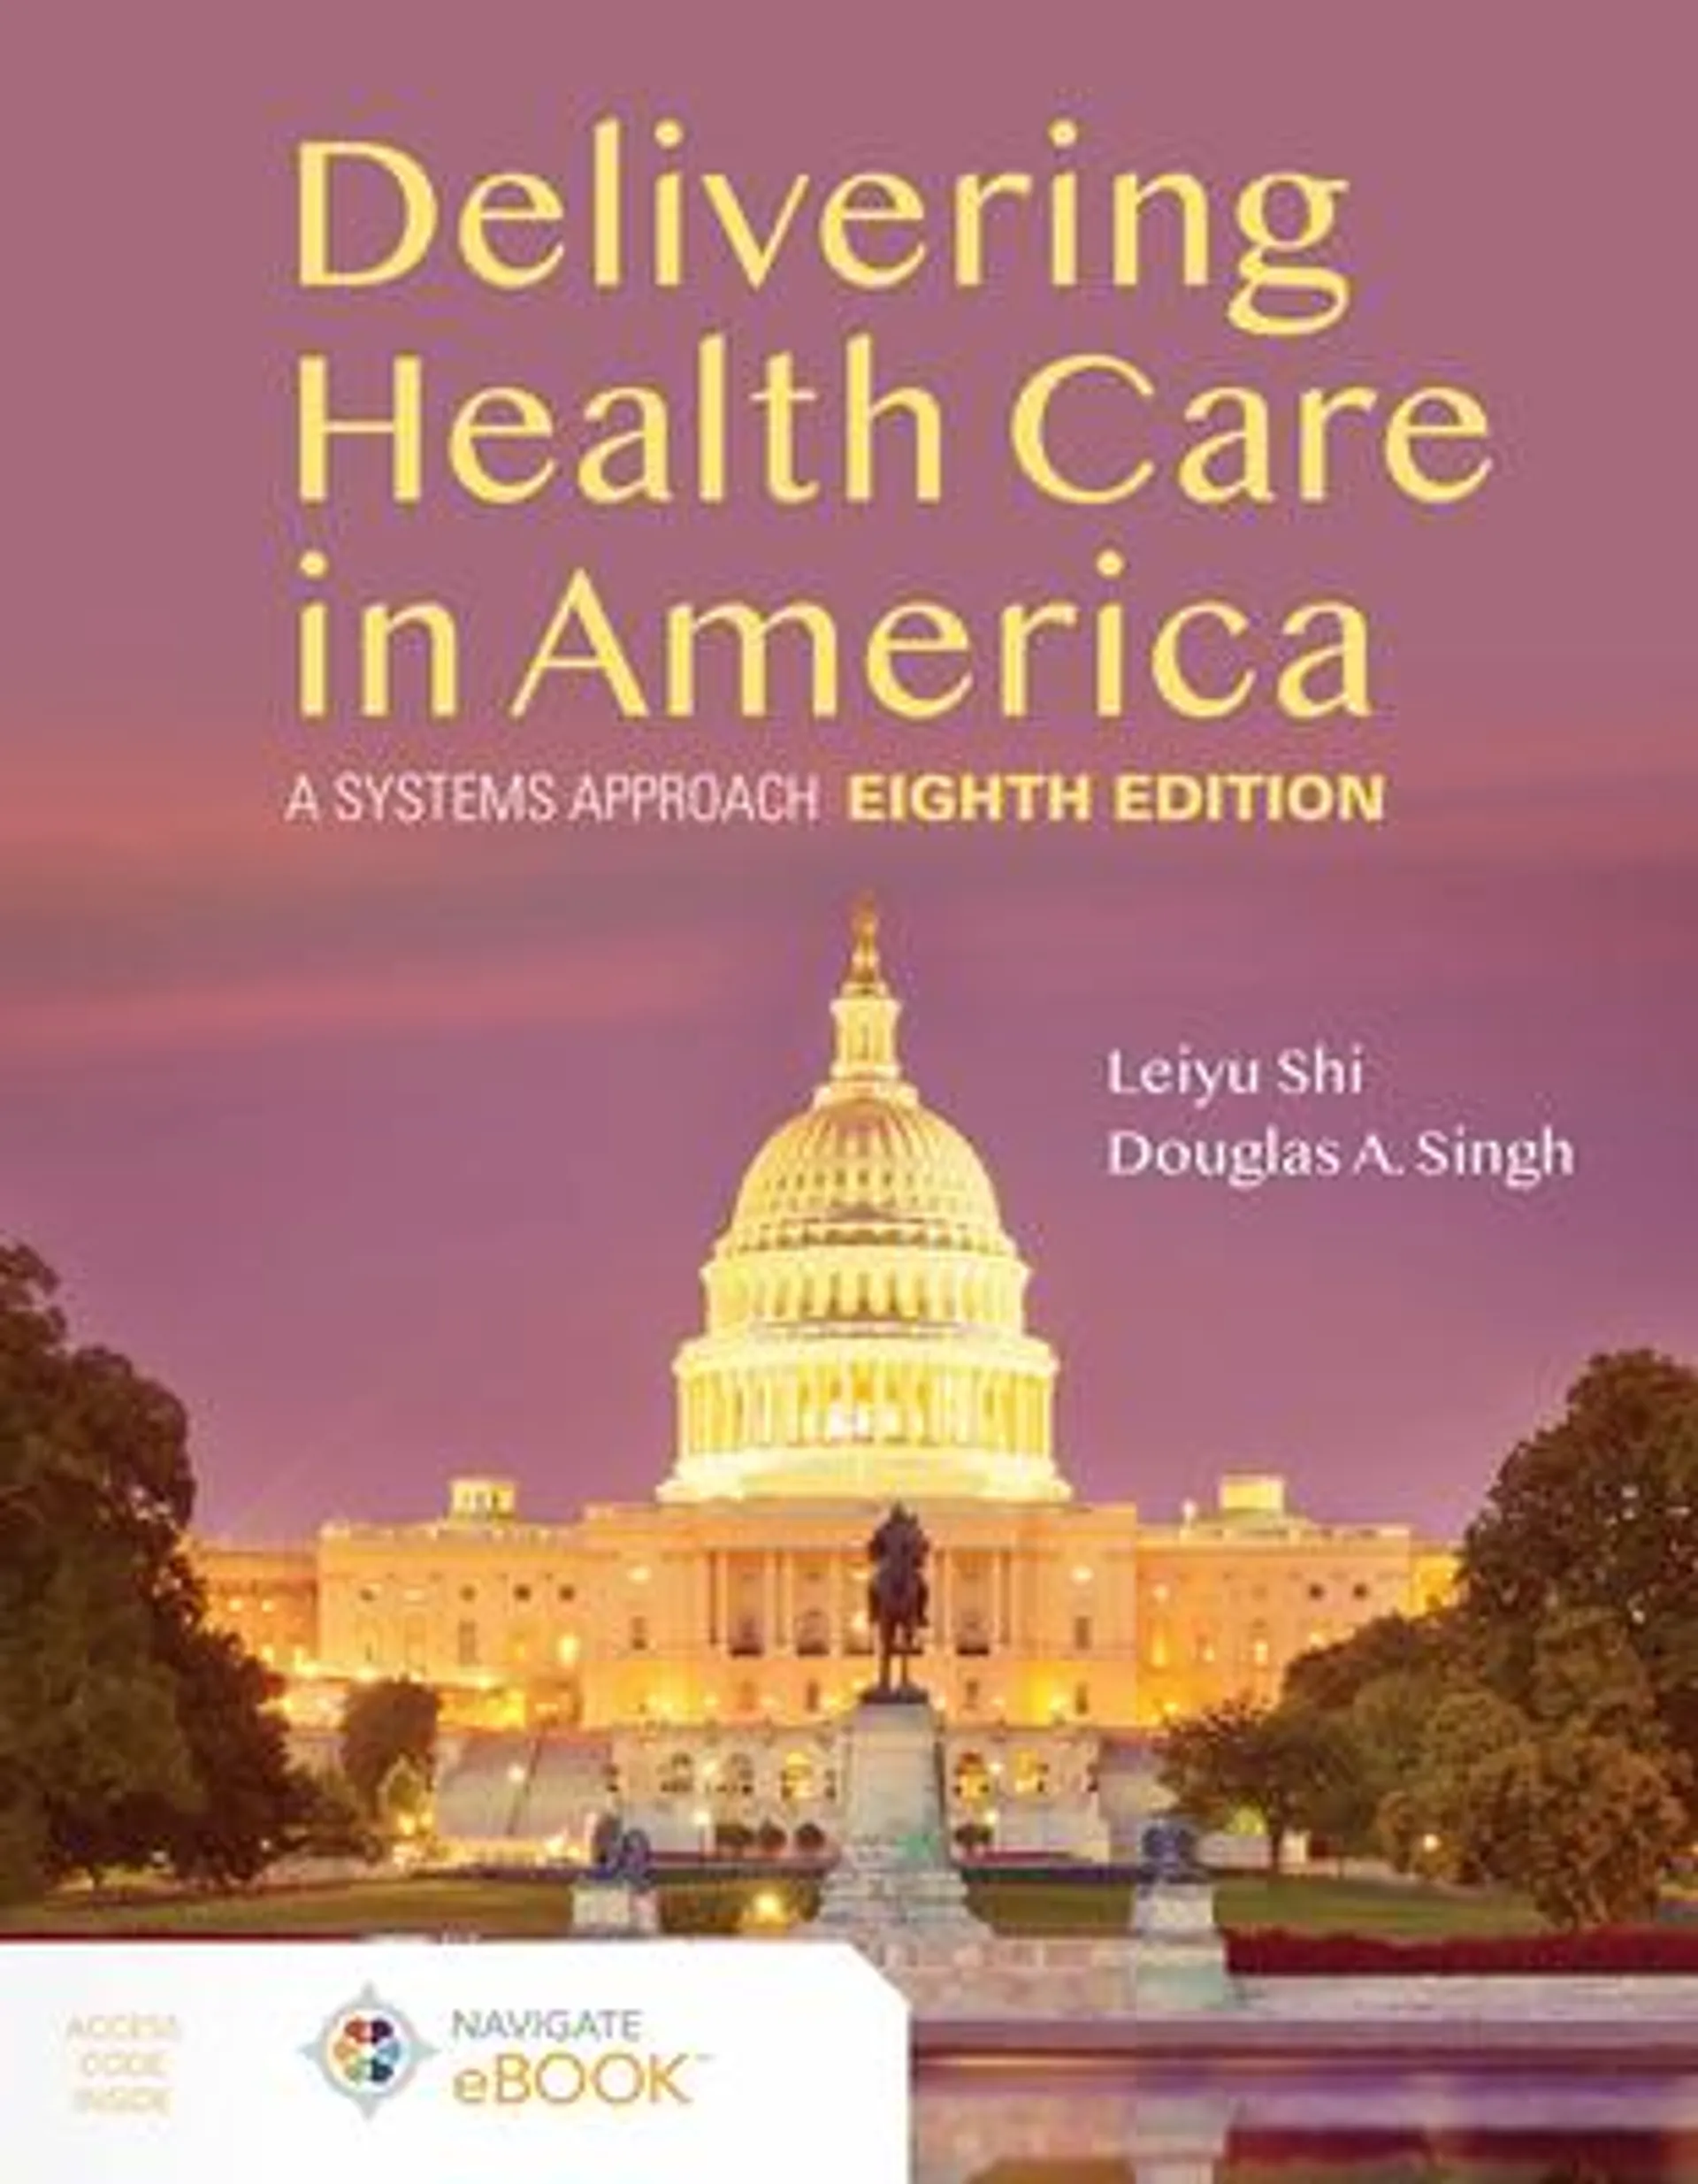 Delivering Health Care in America: A Systems Approach (8th edition)